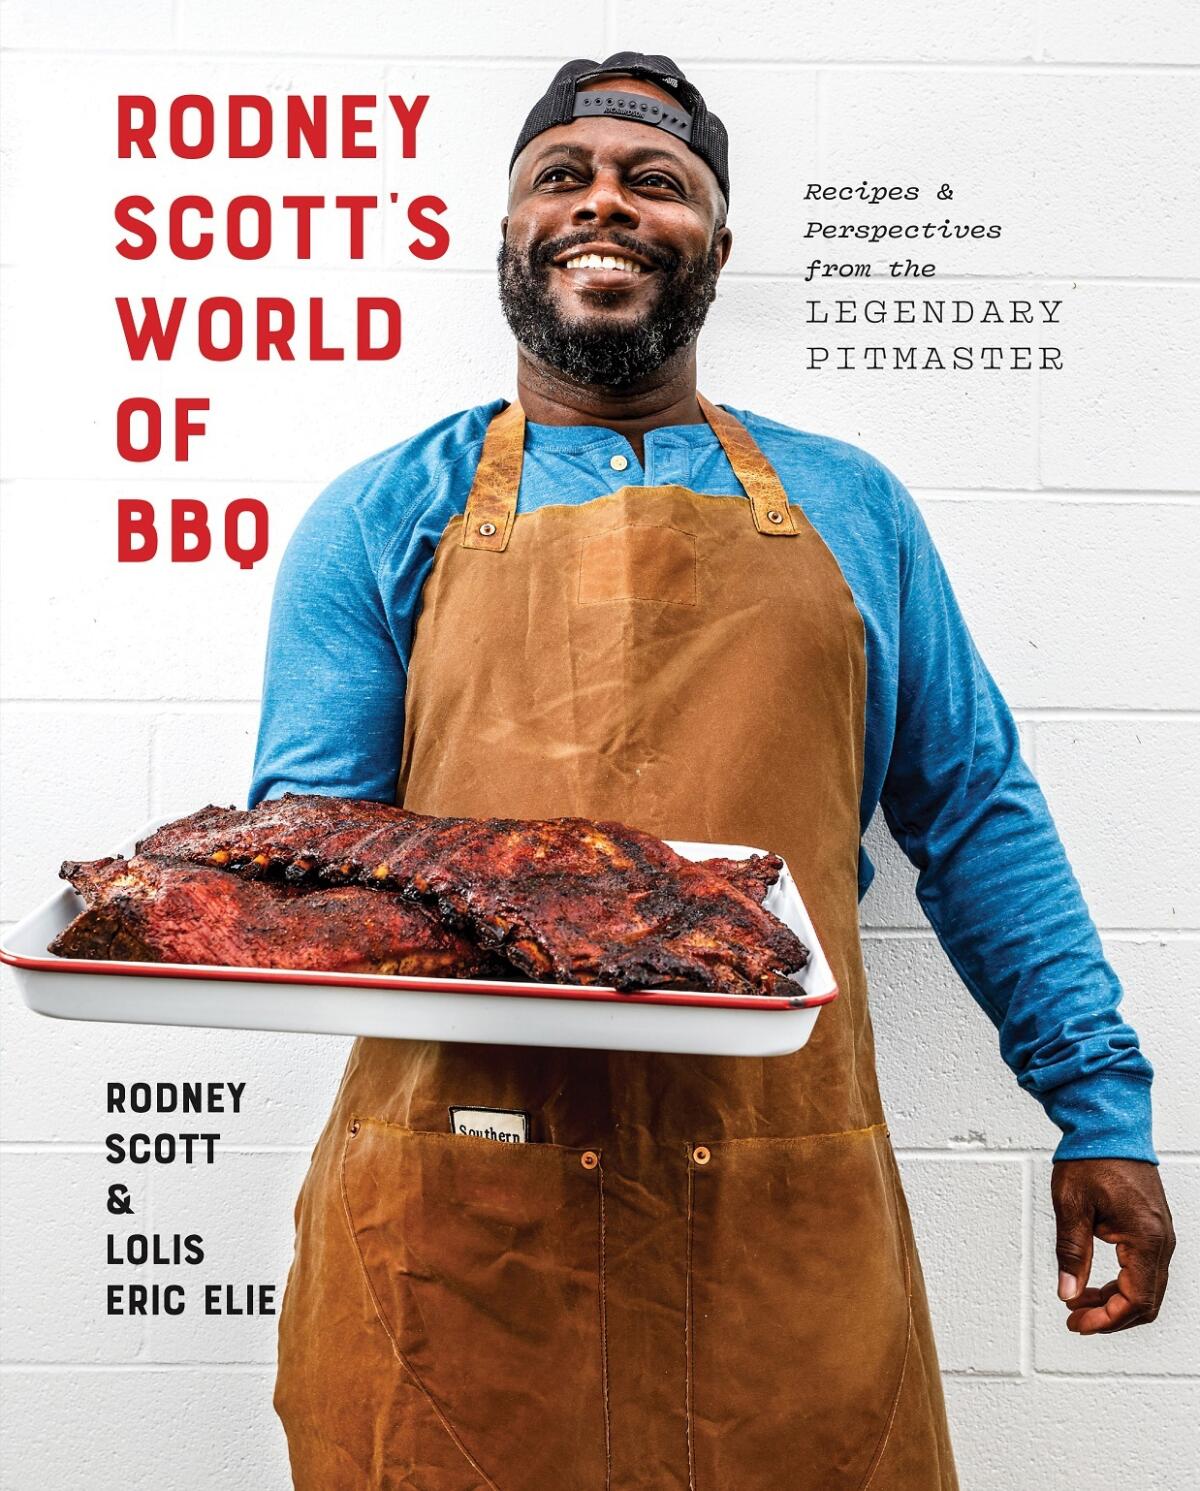 The book cover of "Rodney Scott's World of BBQ" by Rodney Scott and Lolis Eric Elie pictures Scott holding a rack of ribs